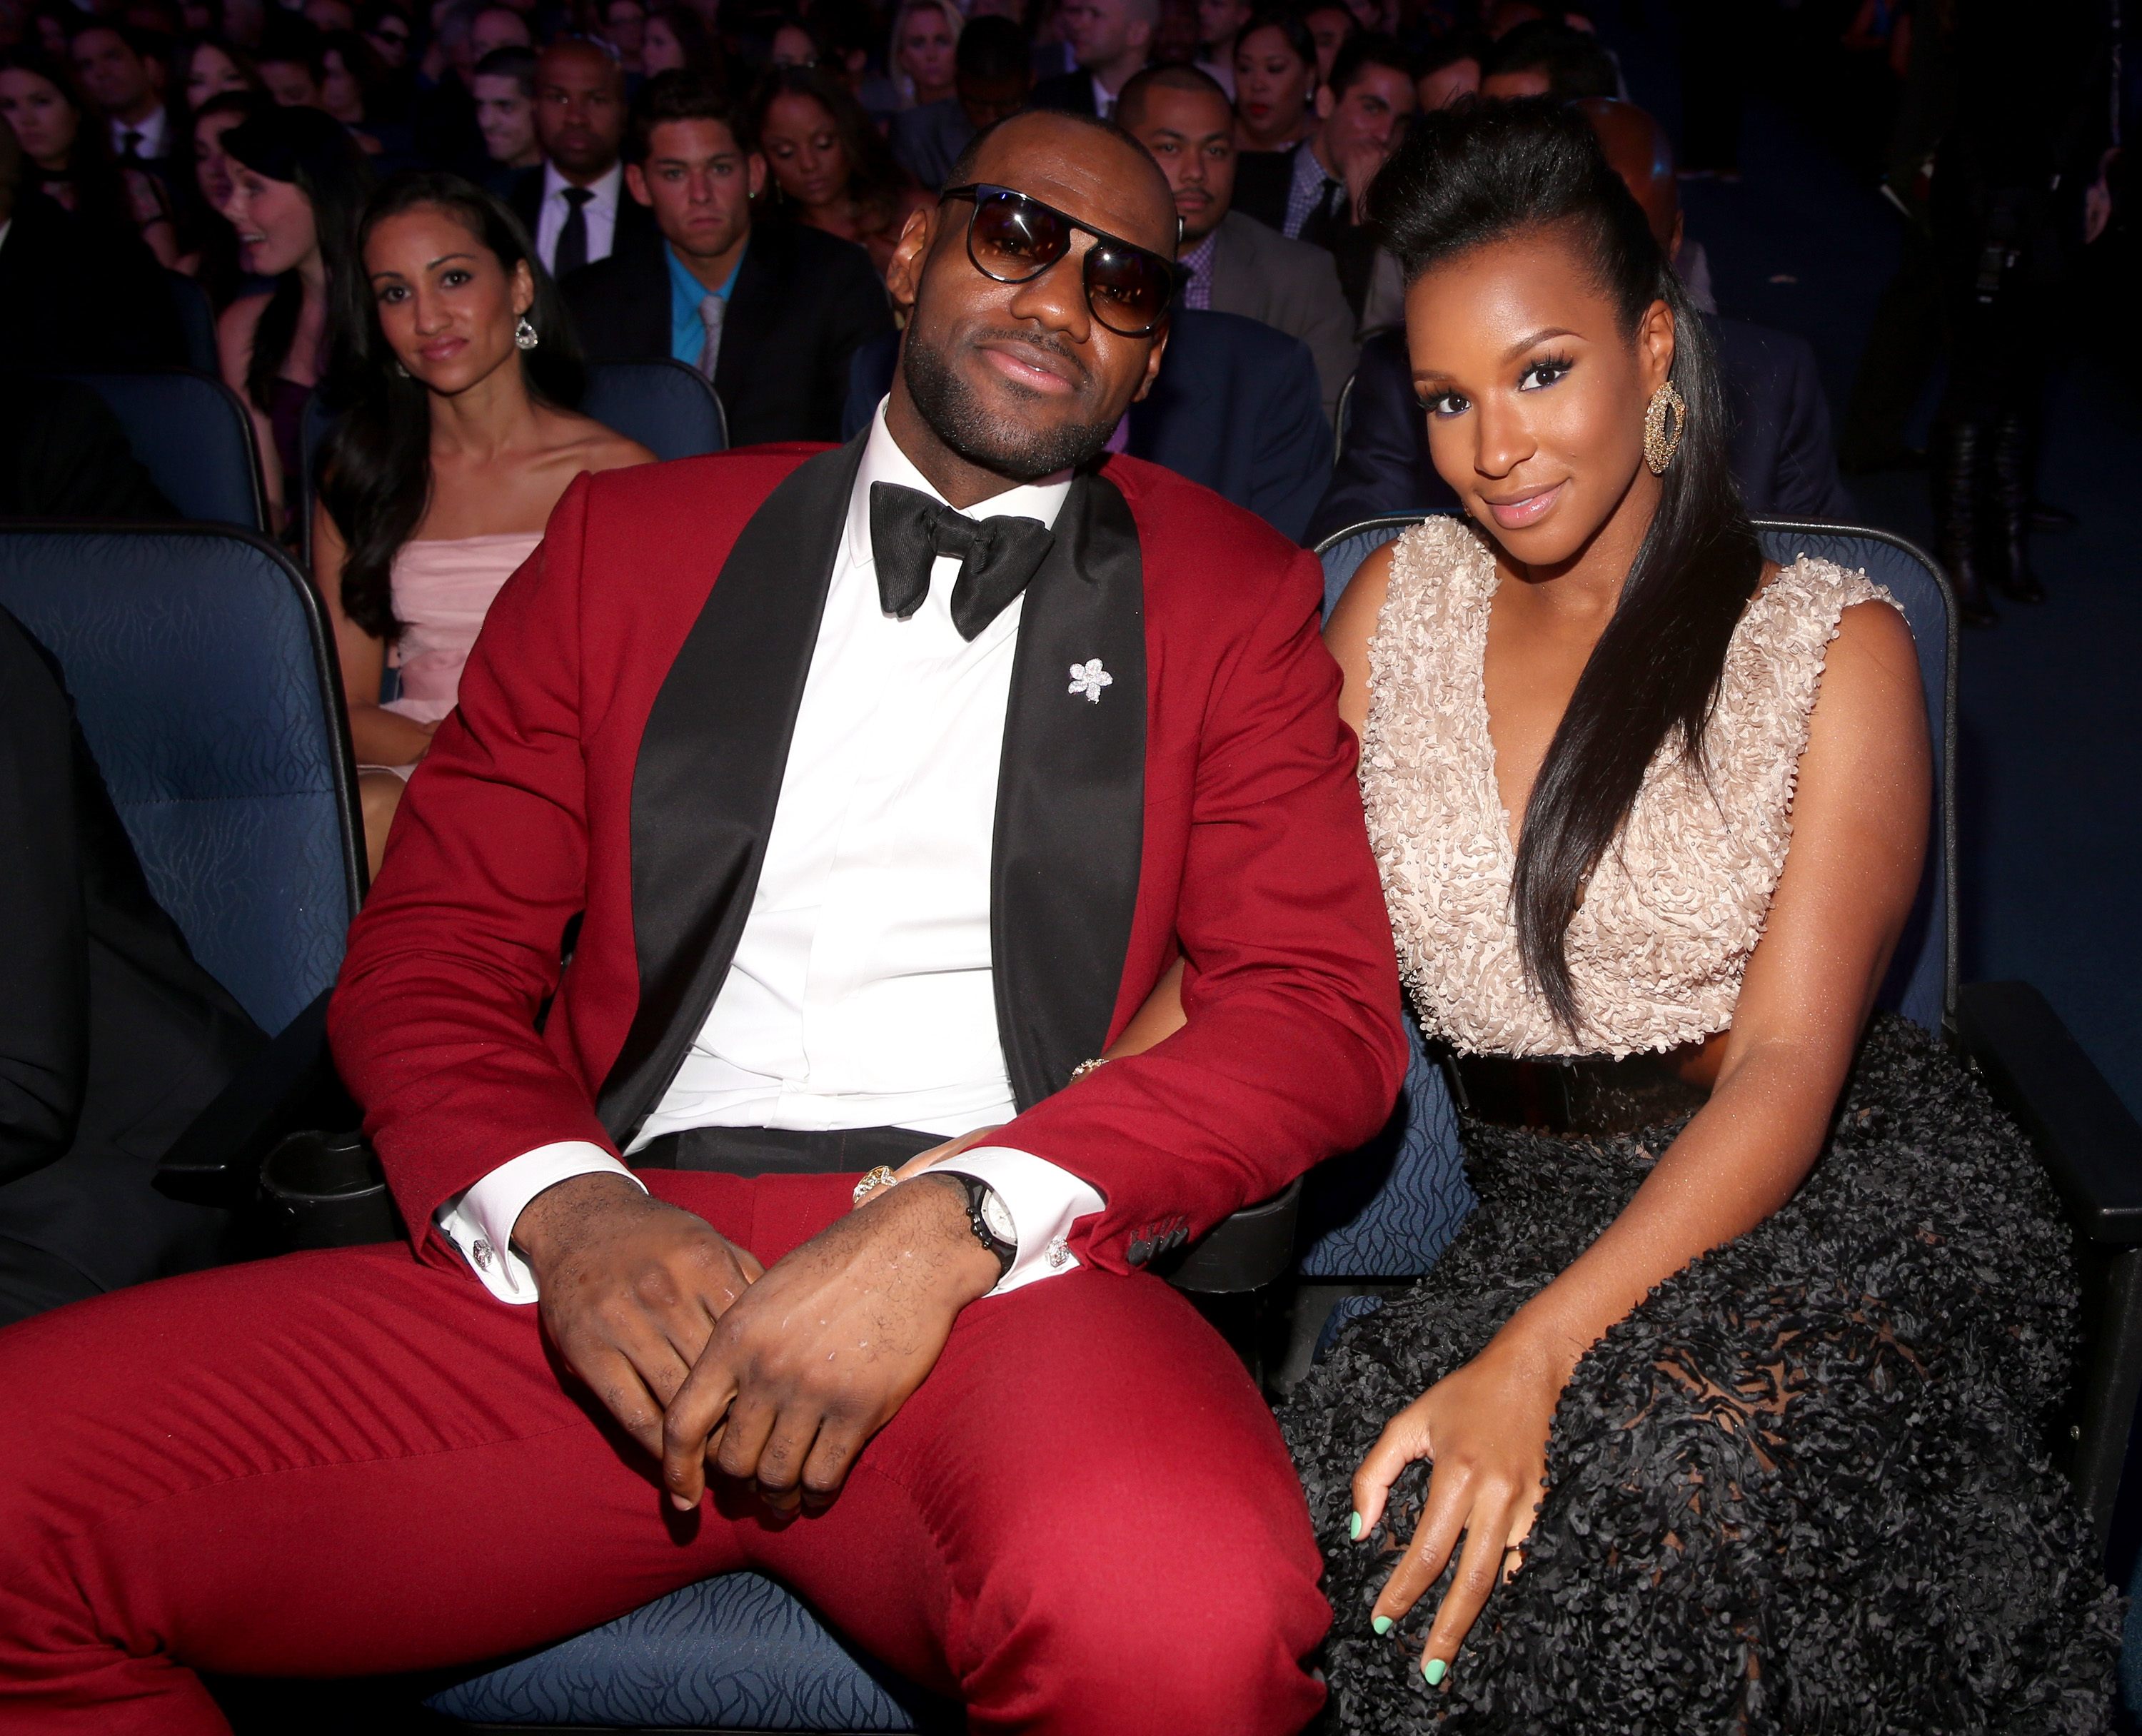 LeBron James Calls Himself “Lucky” While Thirsting Over Wife’s Dress